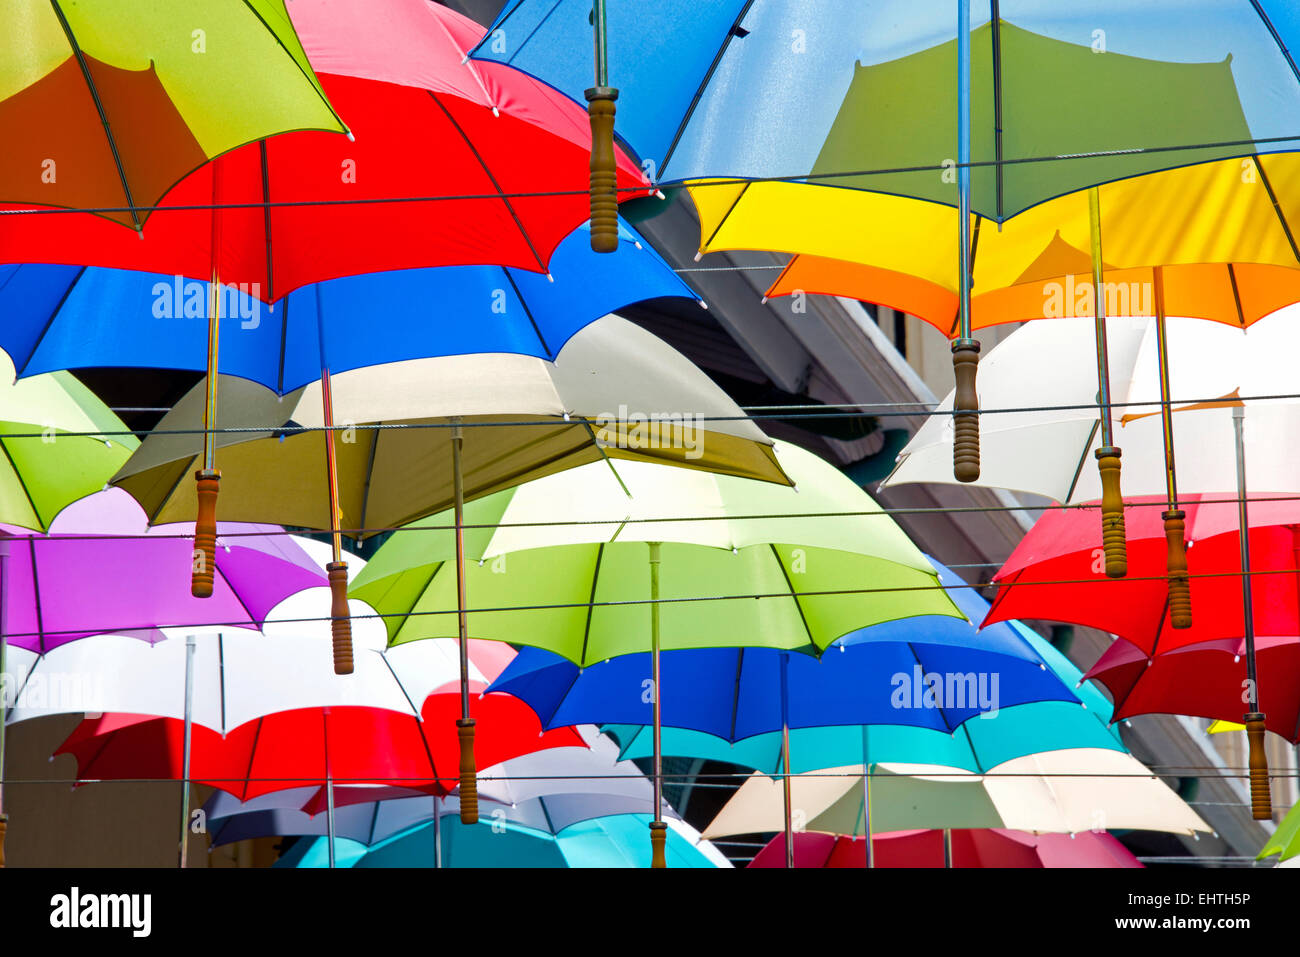 Collection colorful open large umbrellas Stock Photo